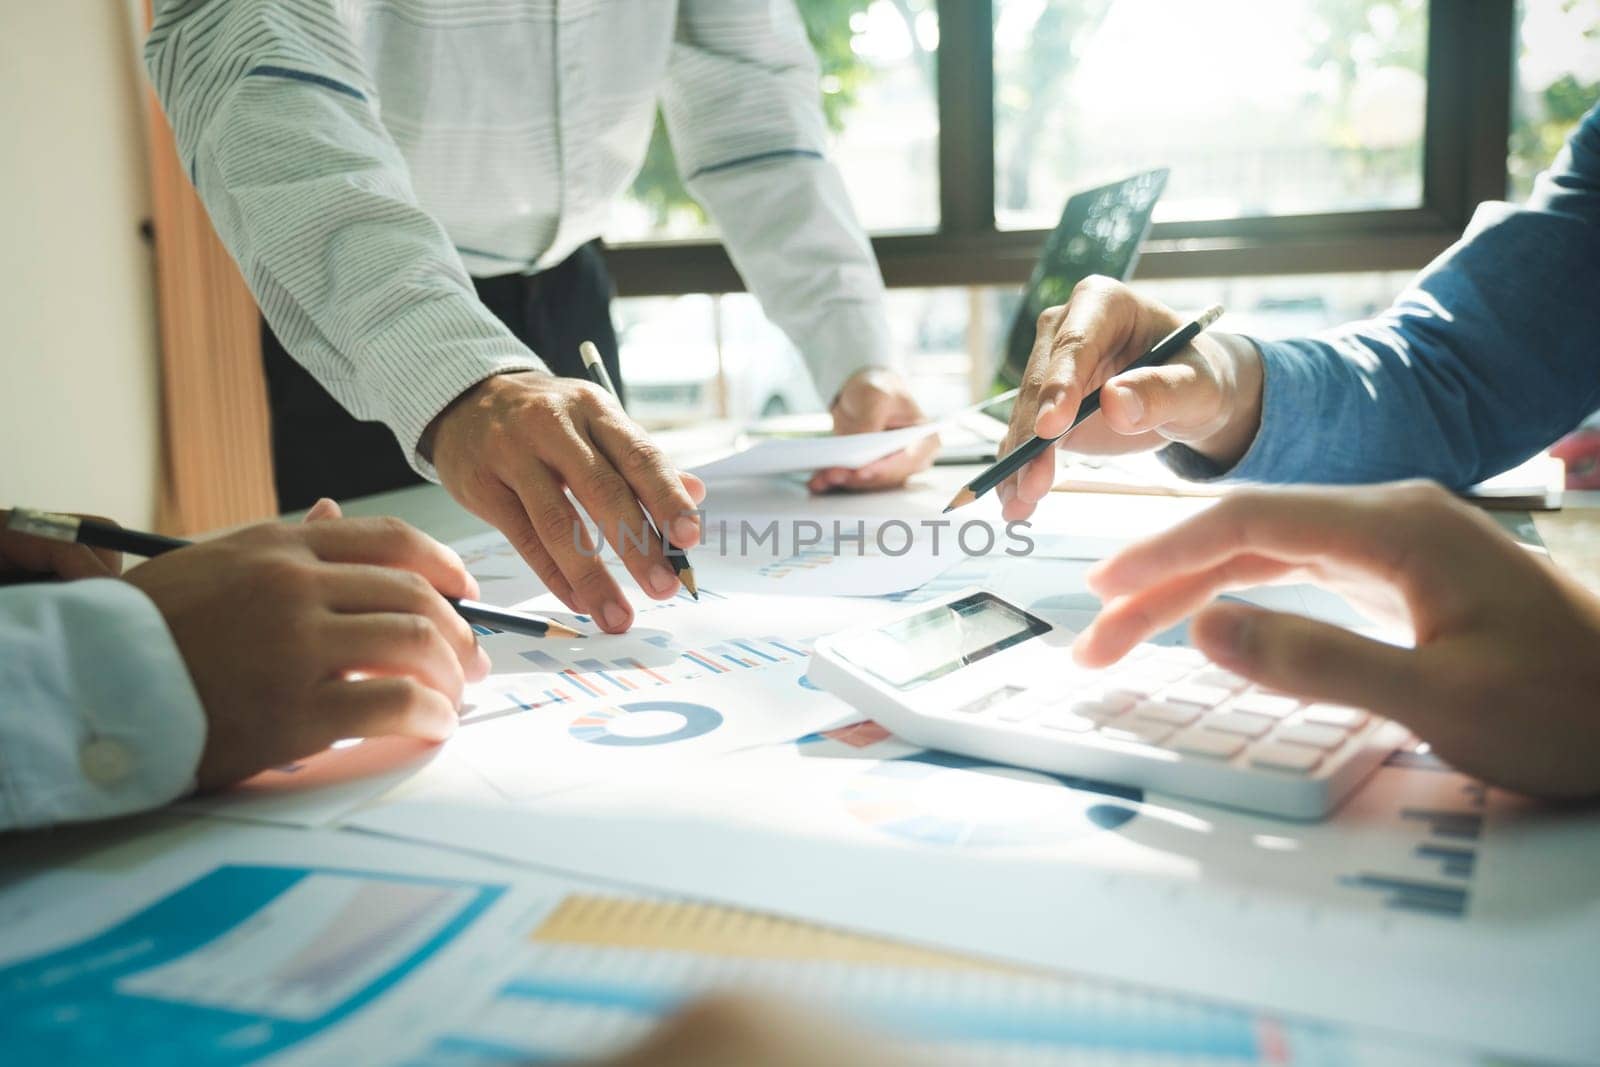 Close-up of businessmen working together at workplace, discussing about strategies, plans, analytic progress, and financial stats, and pointing at graph documents on desk holding pencils and calculator. Business and Teamwork concept.